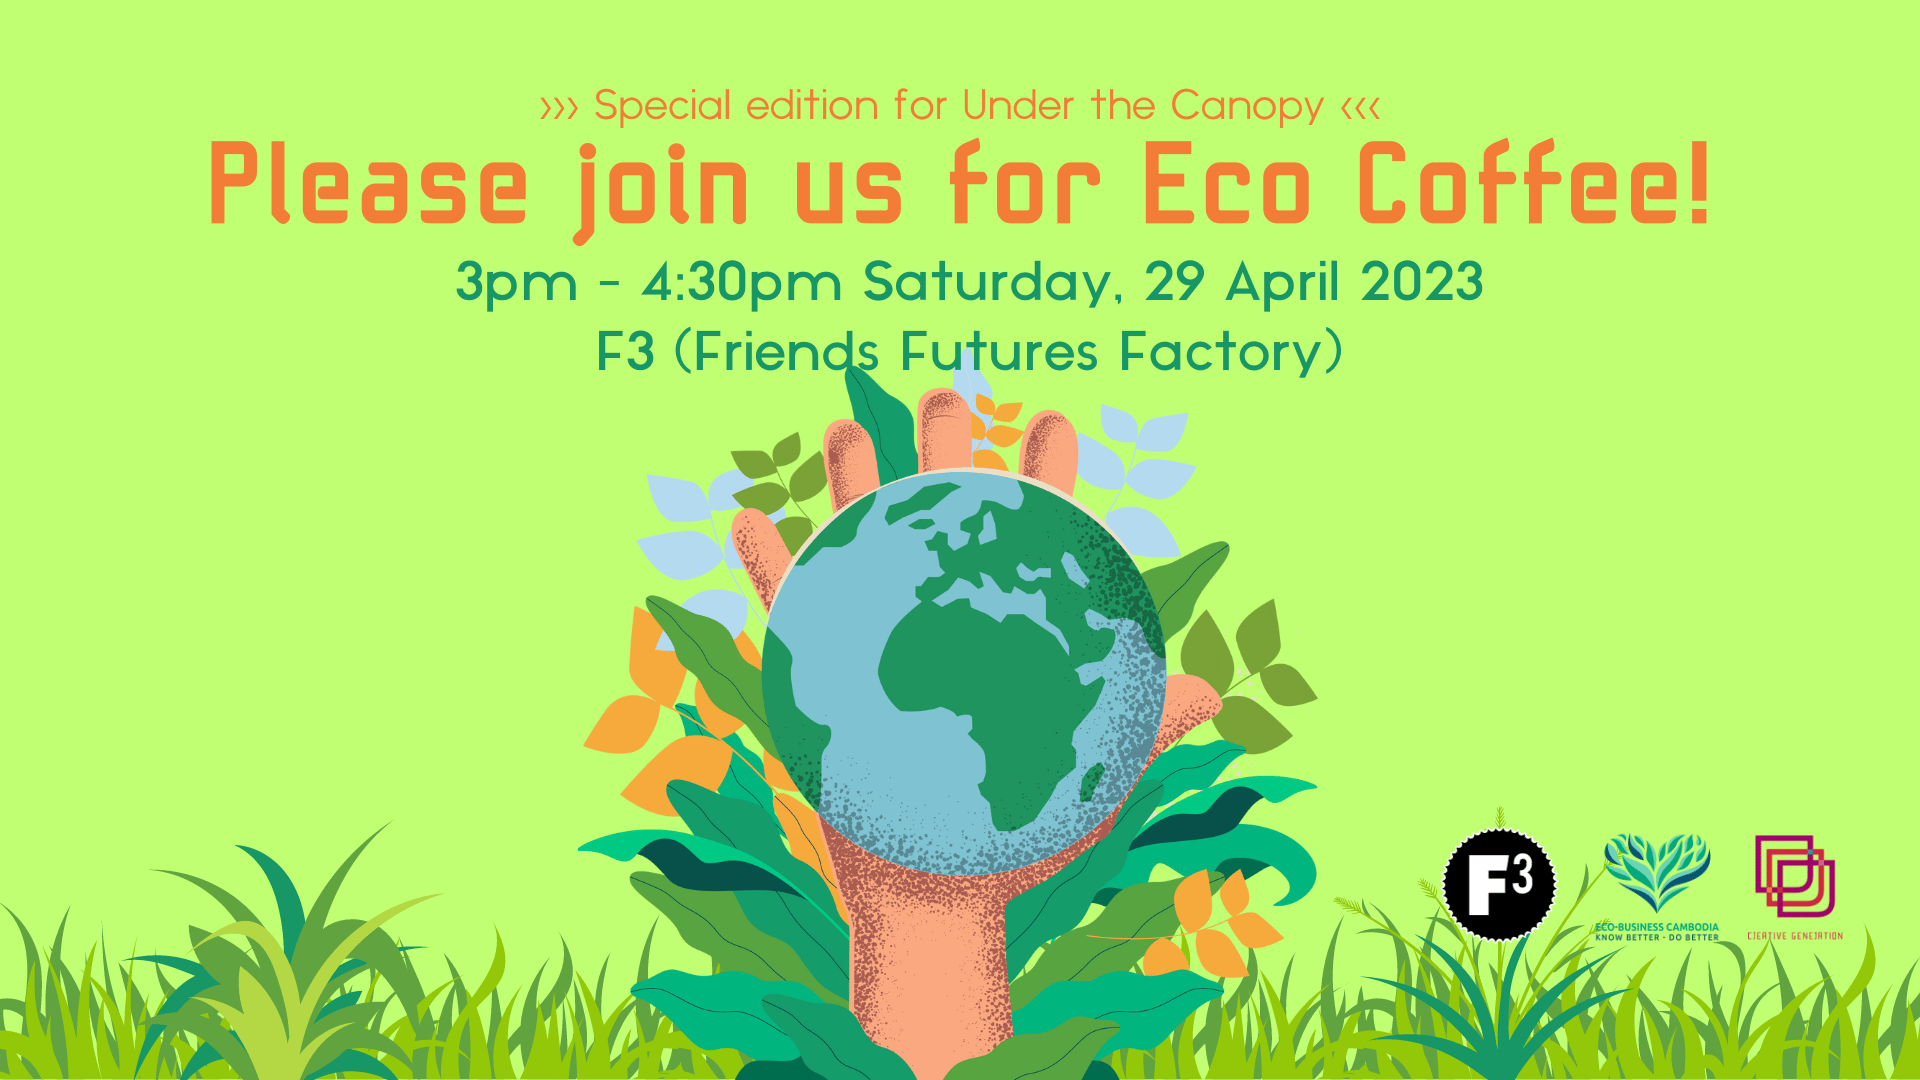 Eco-Coffee: Special Edition for Under the Canopy at F3